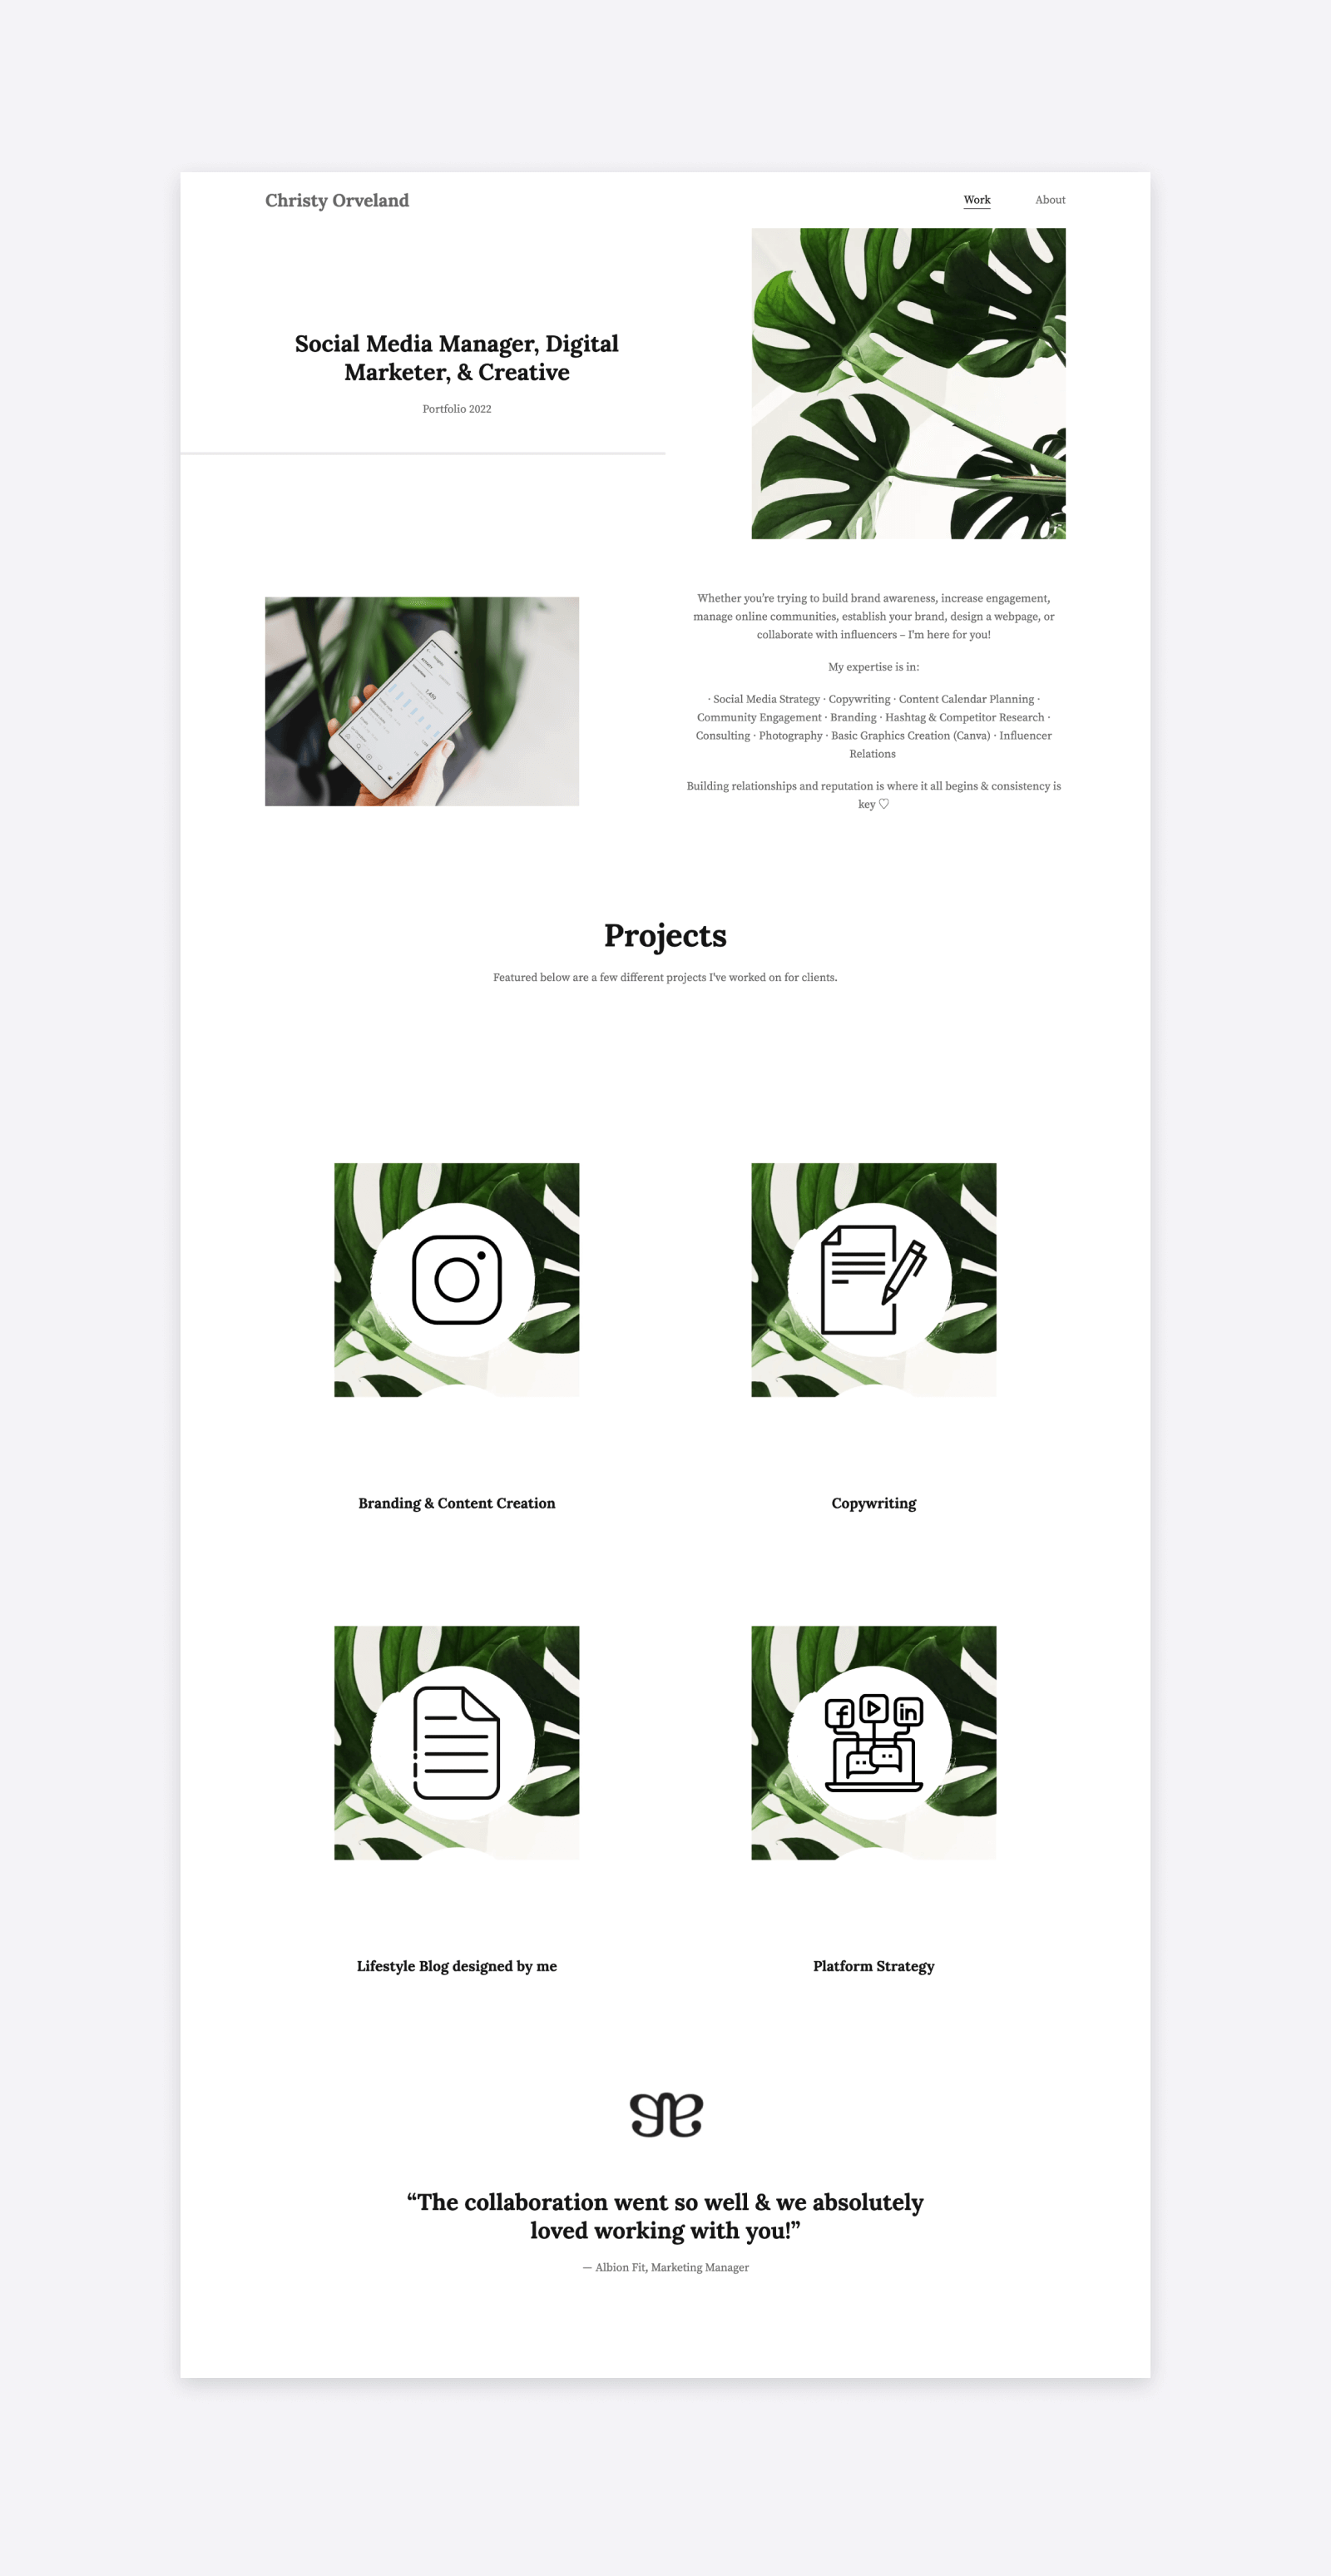 The portfolio website of Christy Orveland, featuring a white background and custom thumbnails with monstera leaves on them